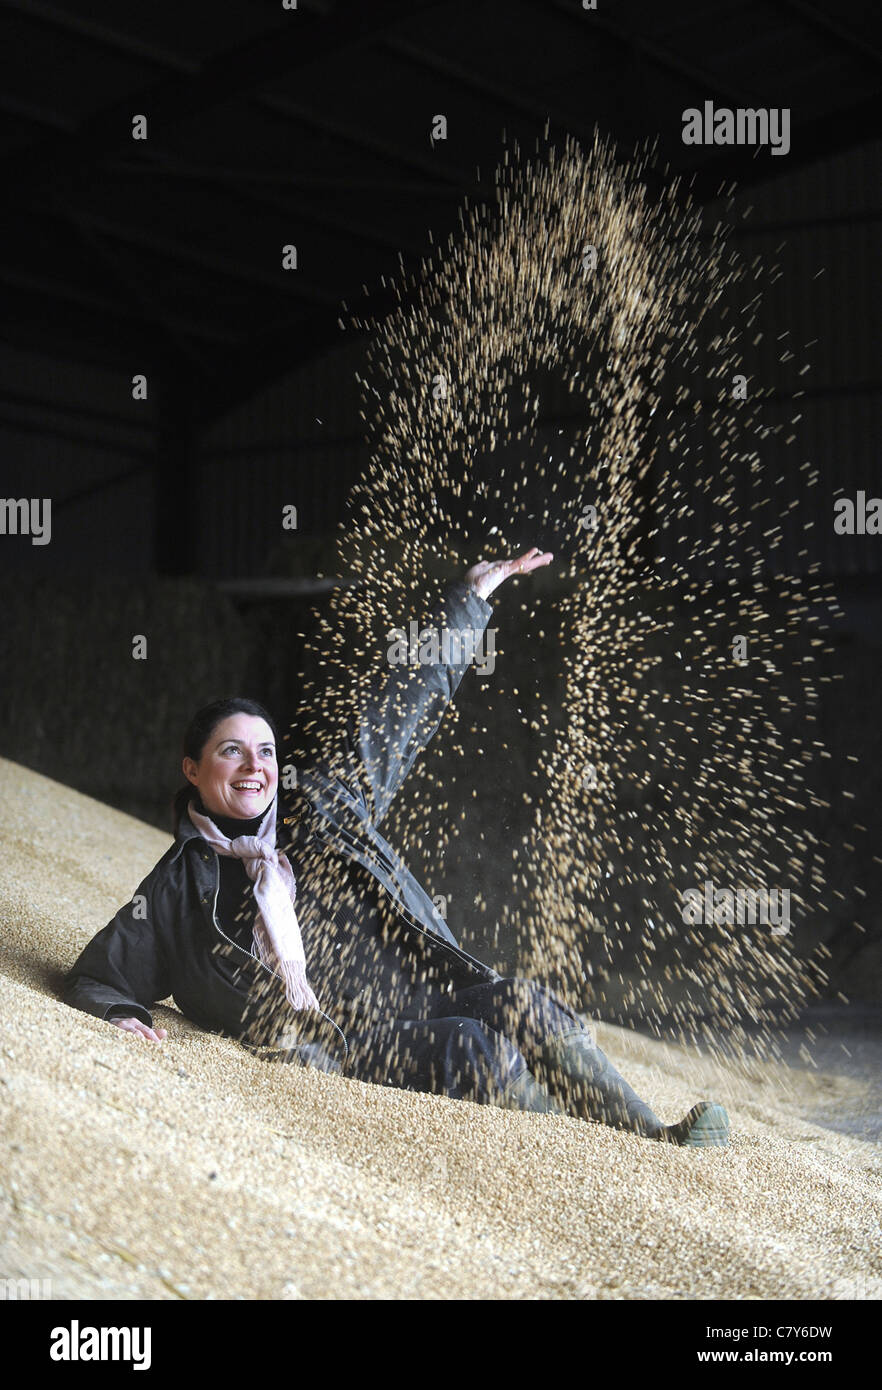 A WOMAN IN A GRAIN STORE THROWING GRAIN INTO THE AIR RE FARMING COSTS CROPS CEREALS FOOD PRICES HEALTH BENEFITS HEALTHY ETC UK Stock Photo